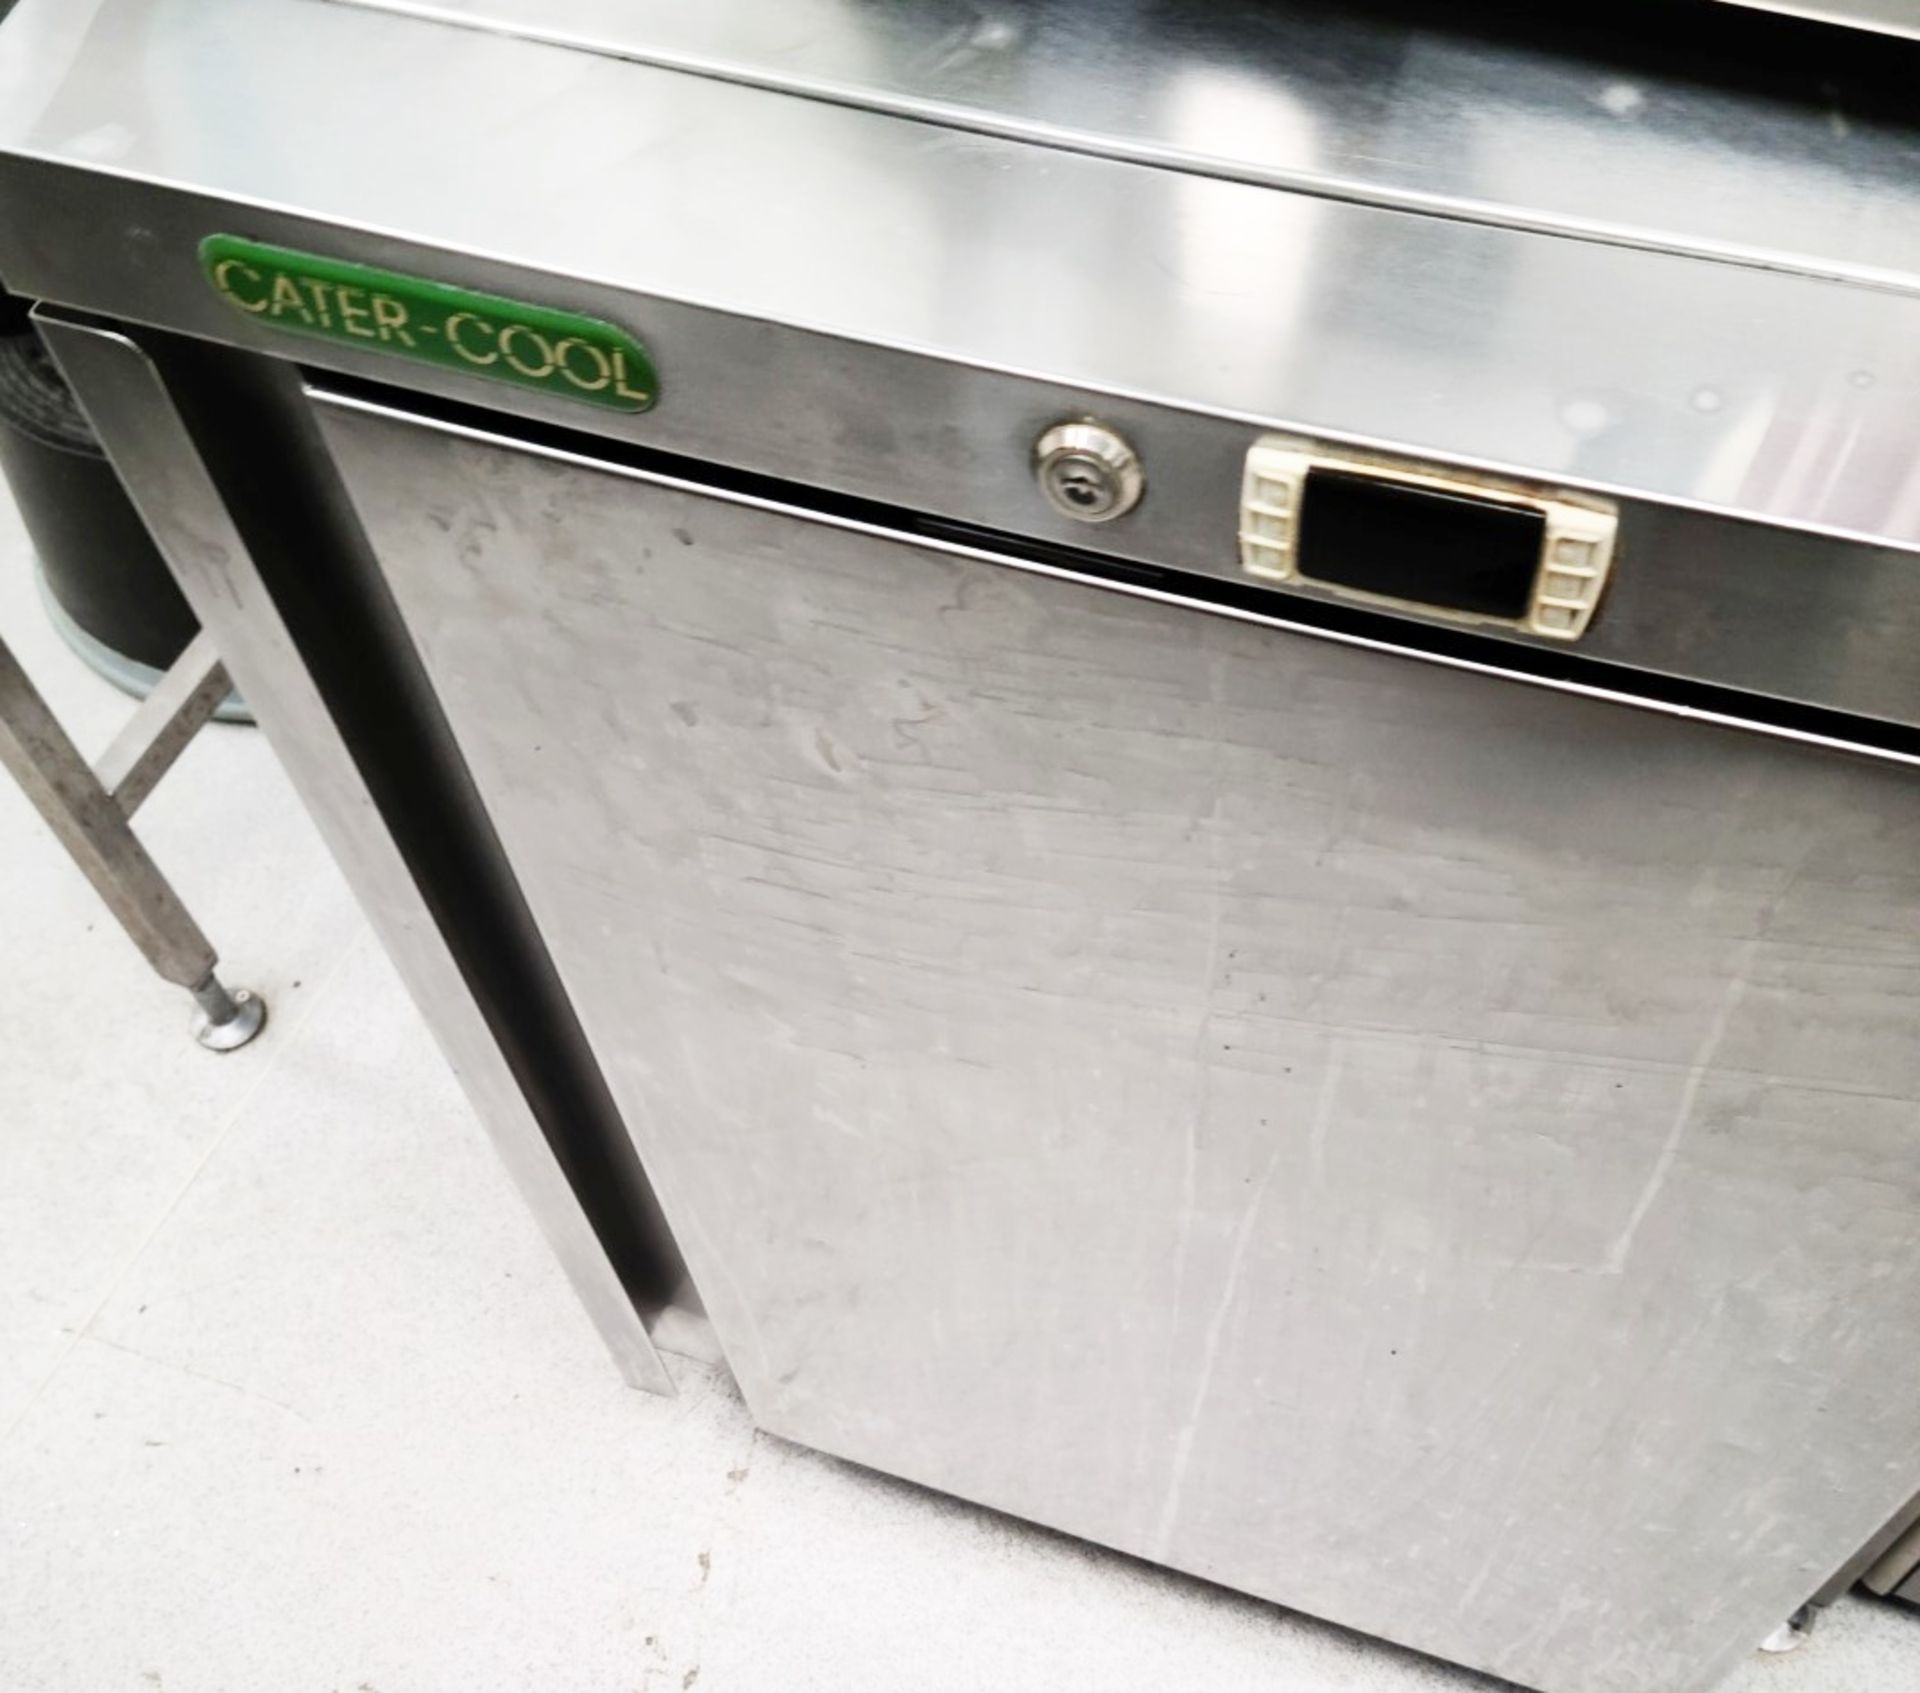 1 x CATER-COOL CK200RSS 170 Litre Under Counter Fridge With Stainless Steel Exterior - Image 3 of 6